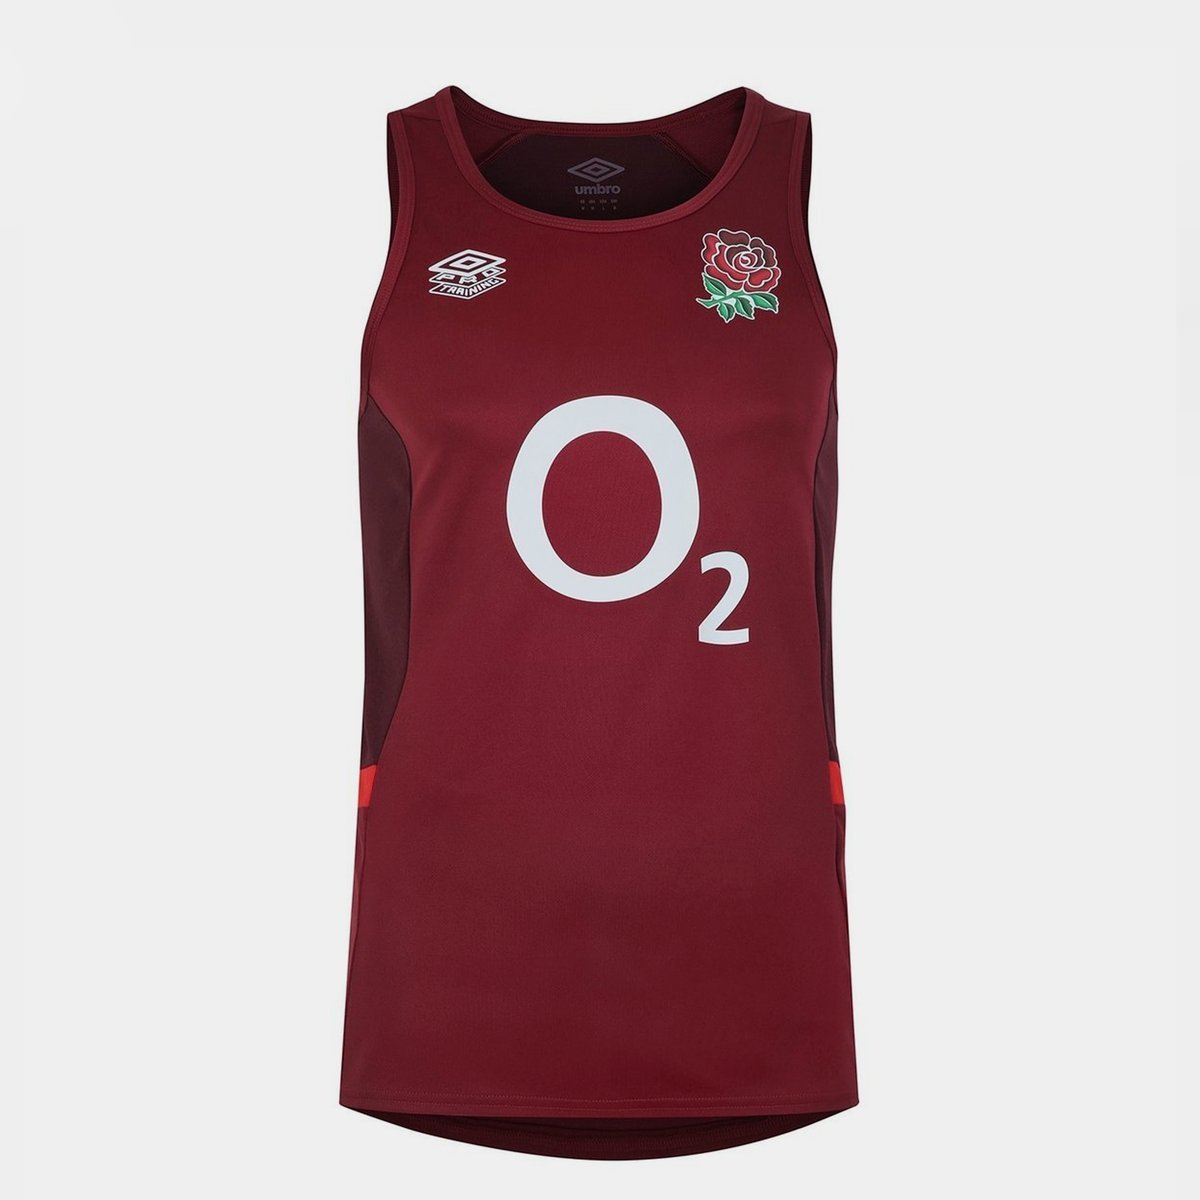 Umbro Mens Official Licensed Product - Adult England Rugby 23/24 Home  Replica Jersey - Umbro Rugby Jerseys